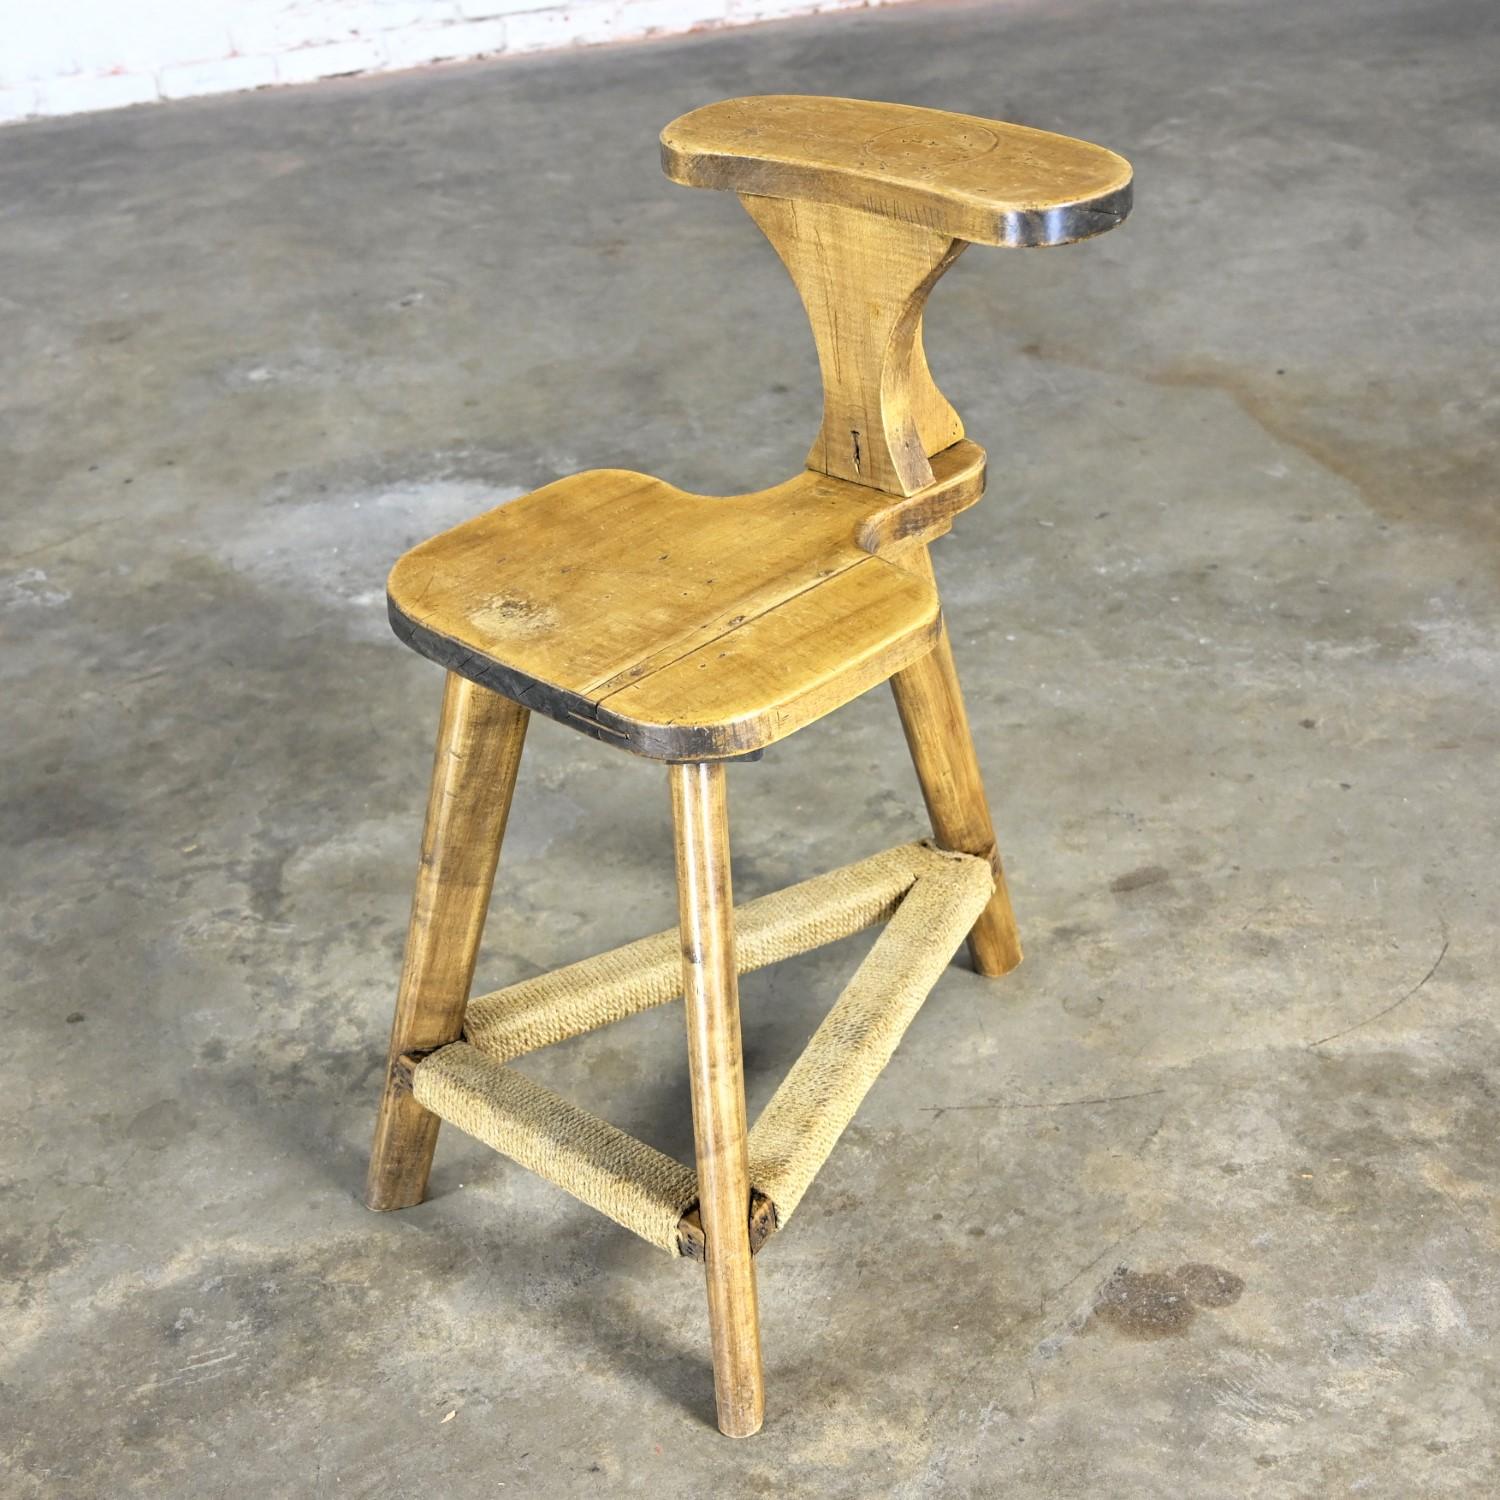 Rustic Distressed Maple Cockfighting Betting or Sporting Chair Tri-Leg Base For Sale 2